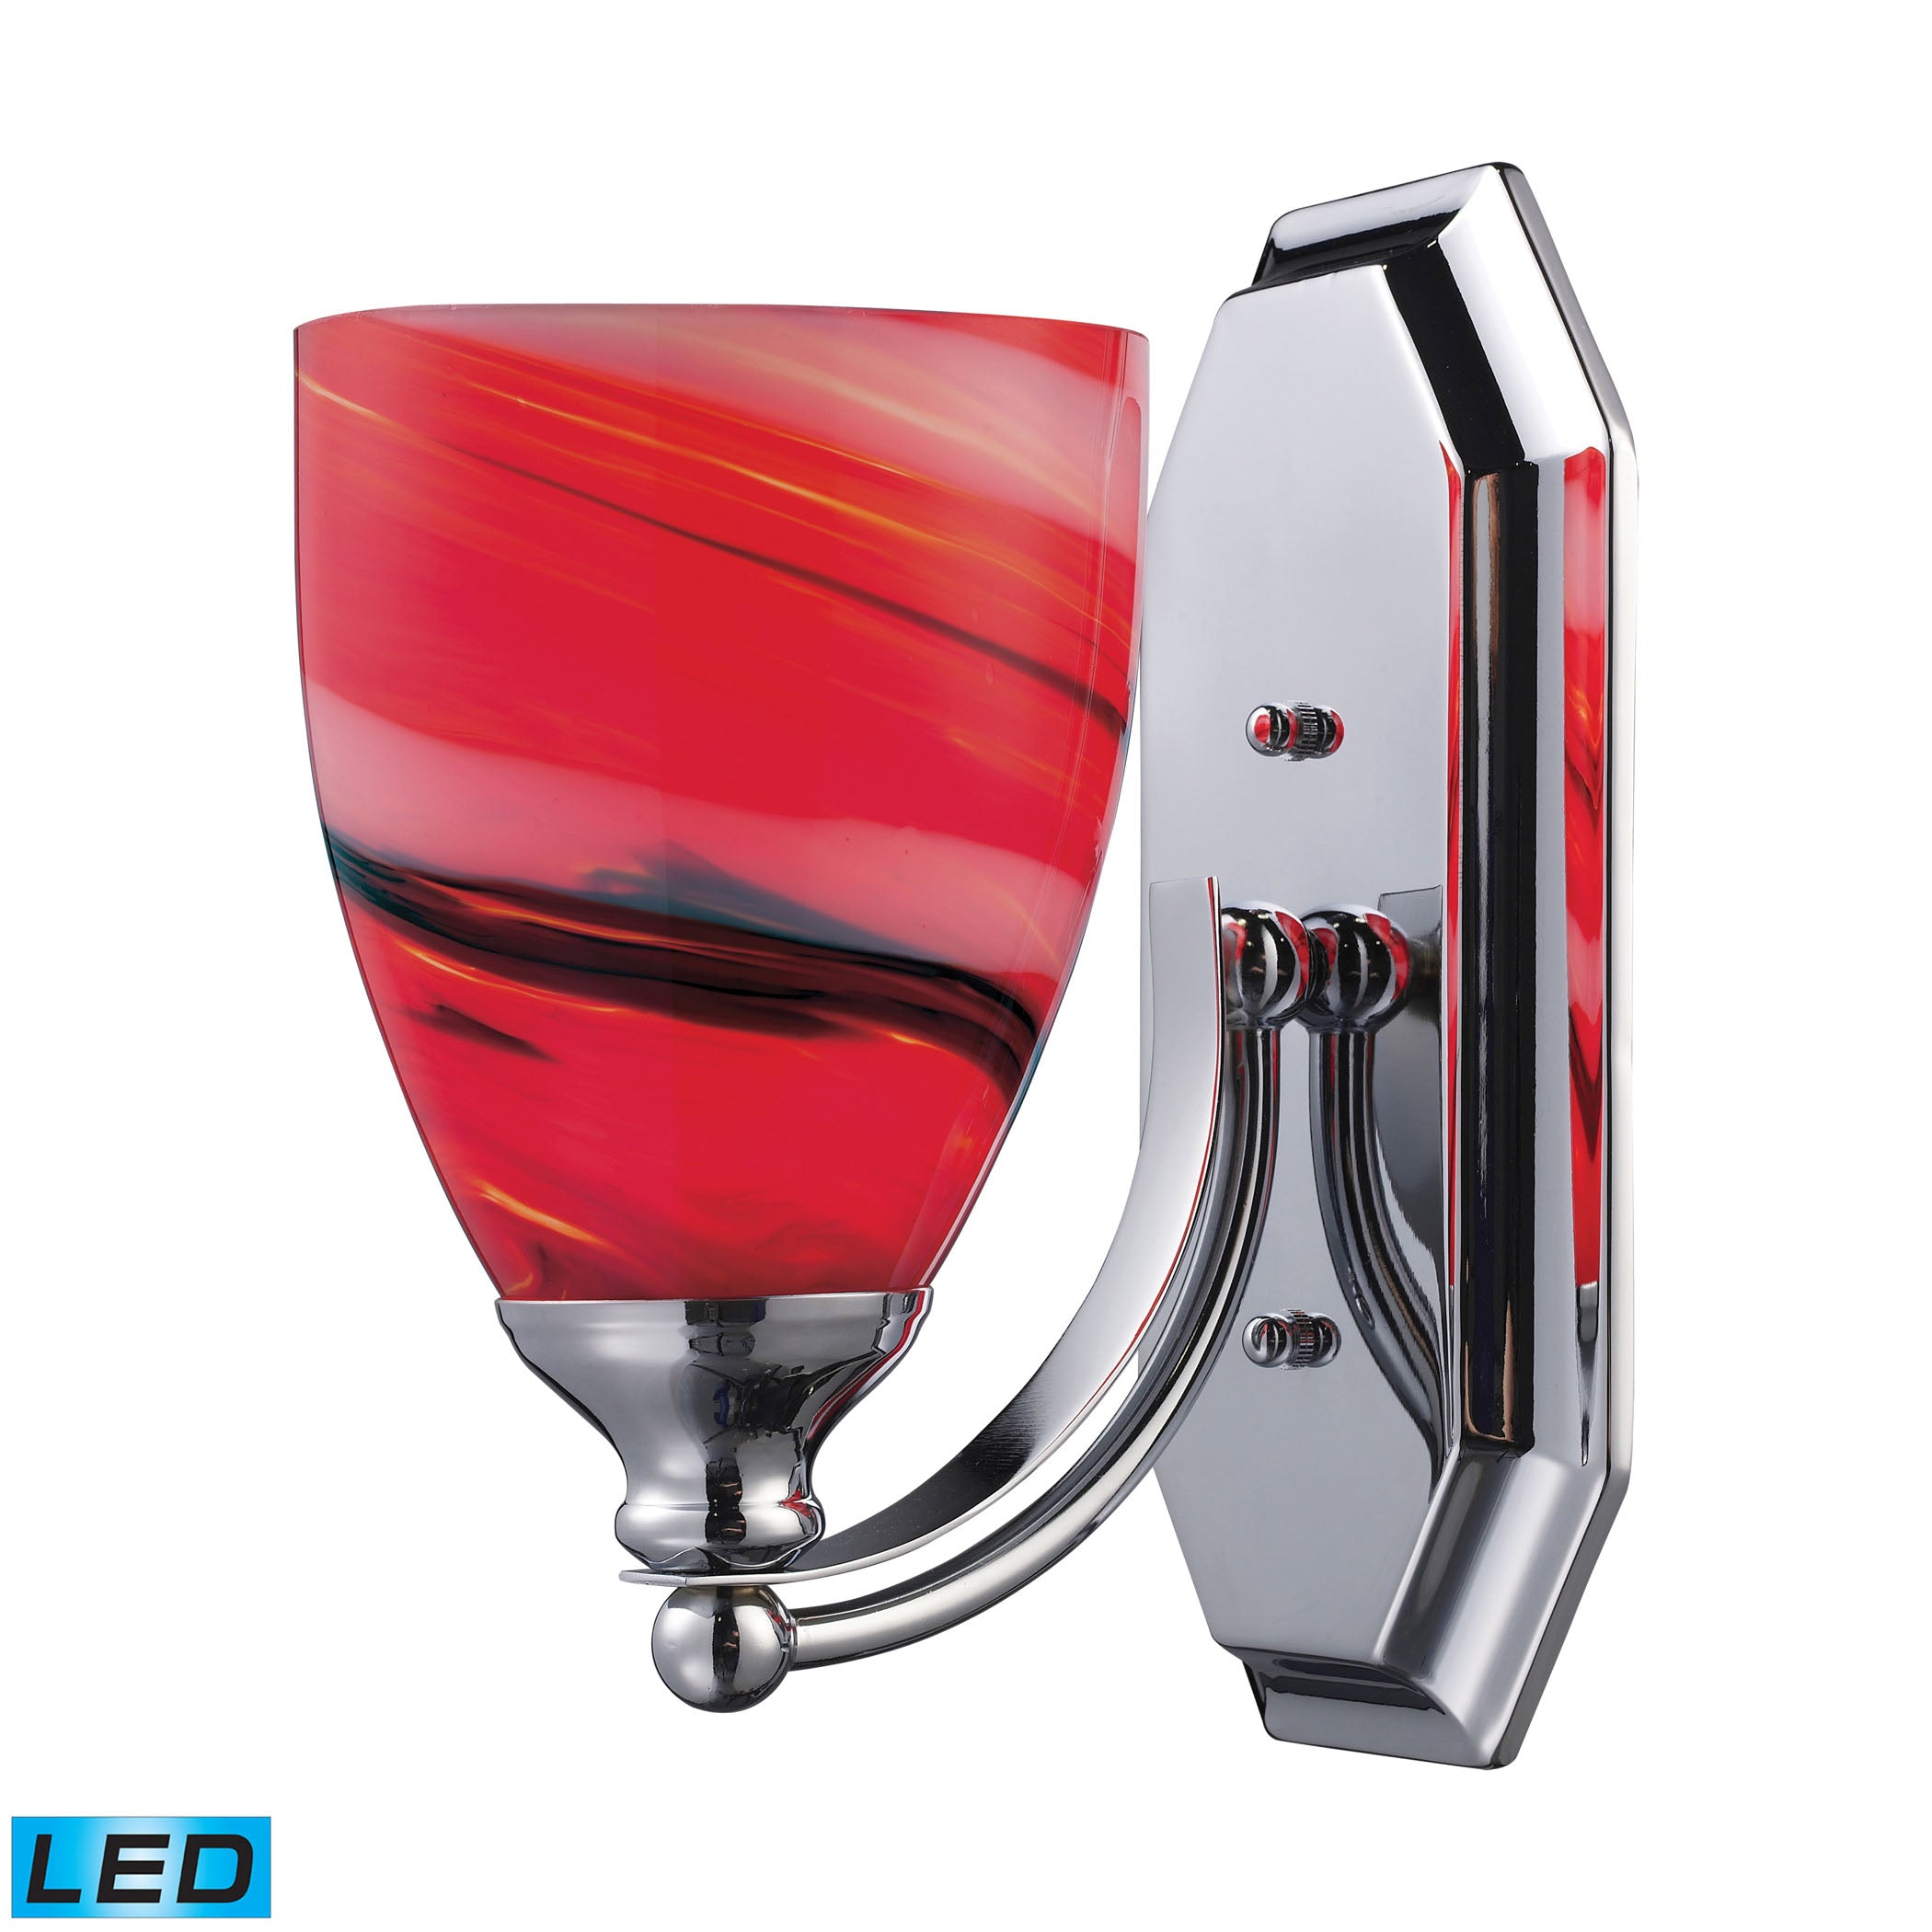 ELK Lighting 570-1C-CY-LED Mix and Match Vanity 1-Light Wall Lamp in Chrome with Canary Glass - Includes LED Bulb